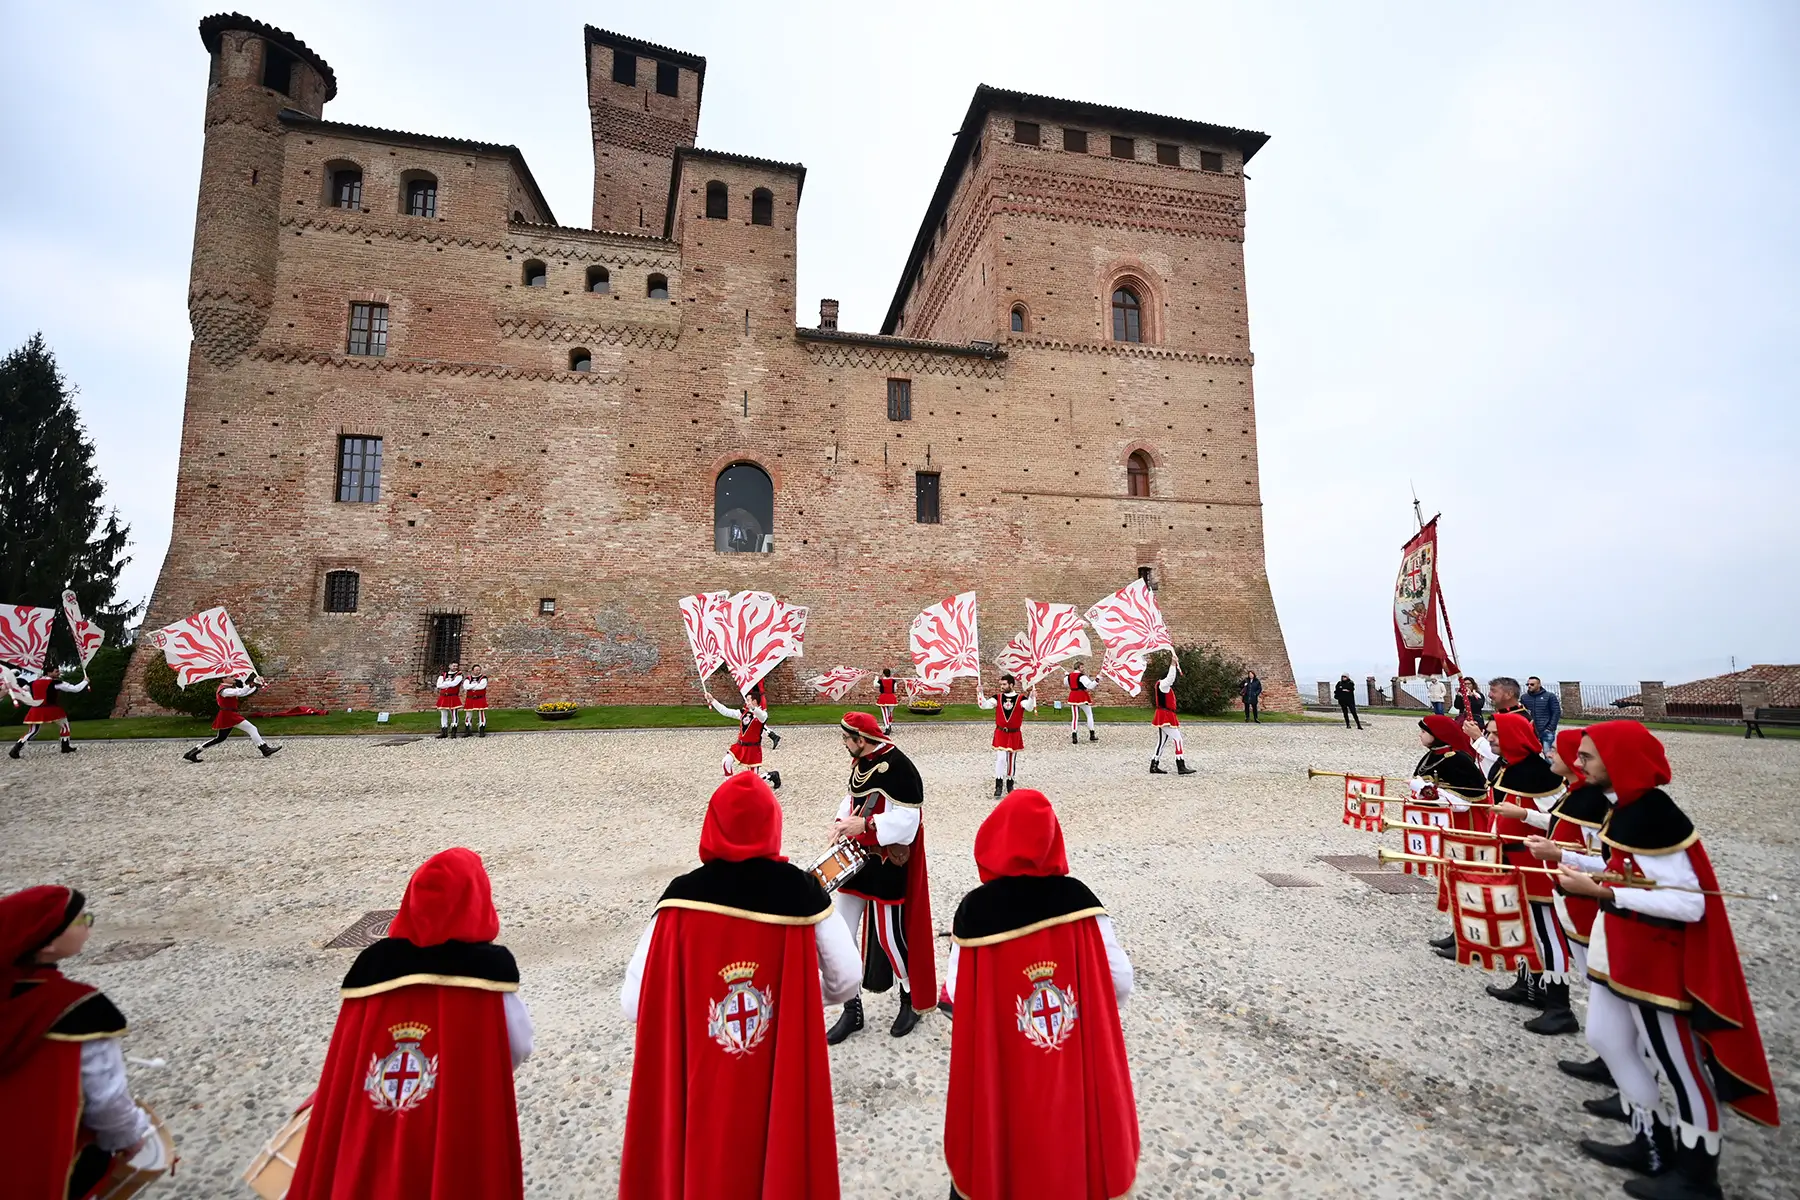 People outside a castle, dressed in red and white medieval costumes, waving white and red material.